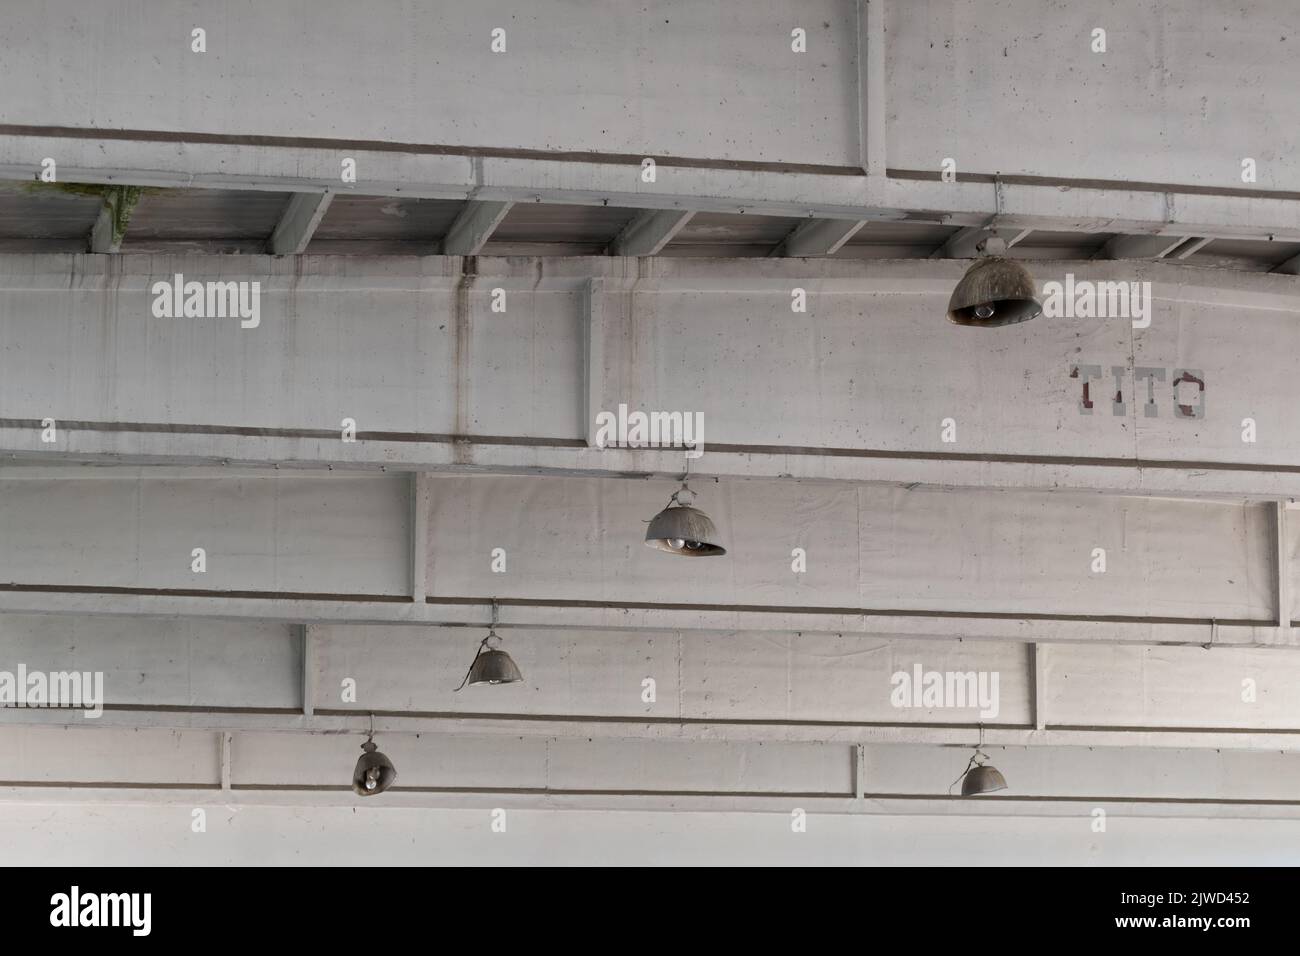 Ceiling lights in abandoned industrial building close up, urban exploration Stock Photo